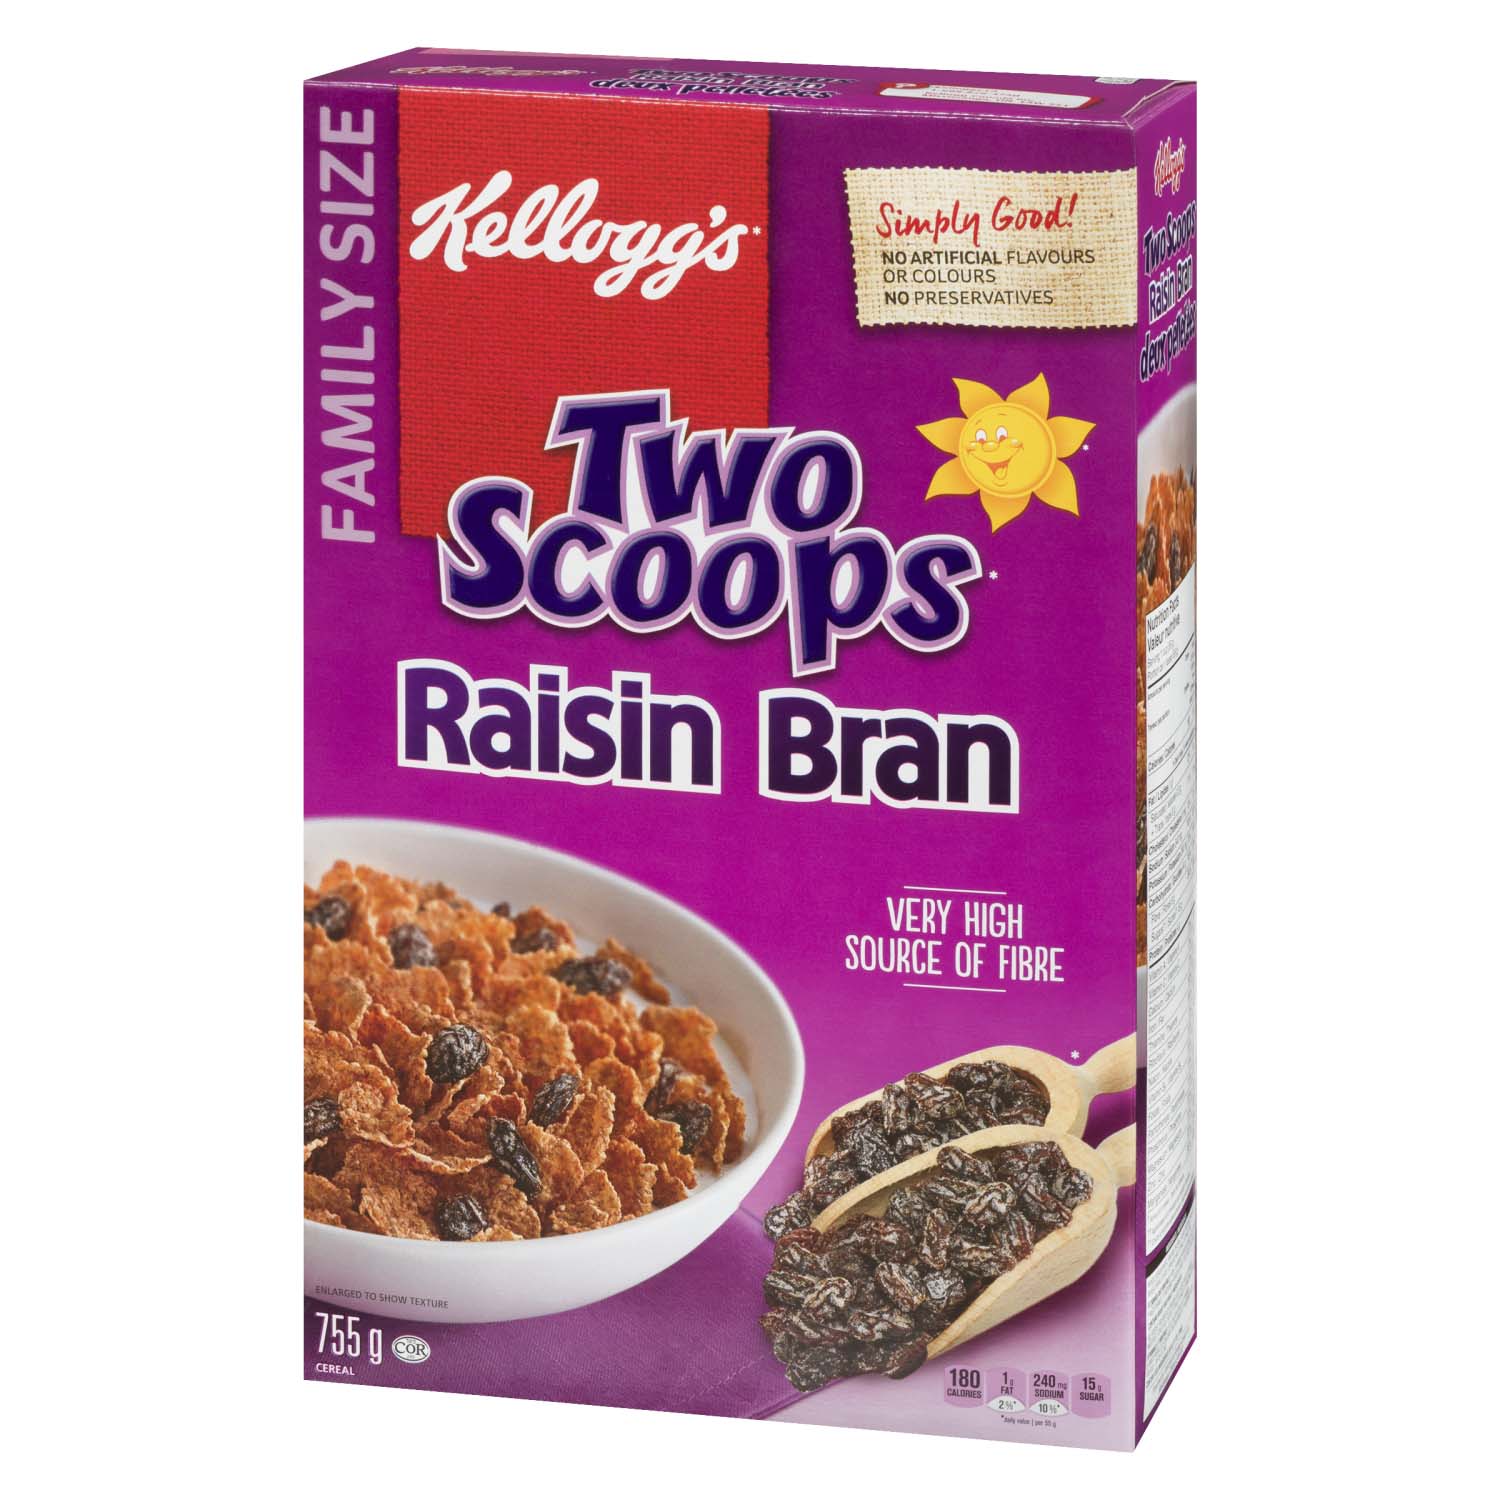 Two Scoops Raisin Bran Cereal Family Size 755 g | Powell's Supermarkets